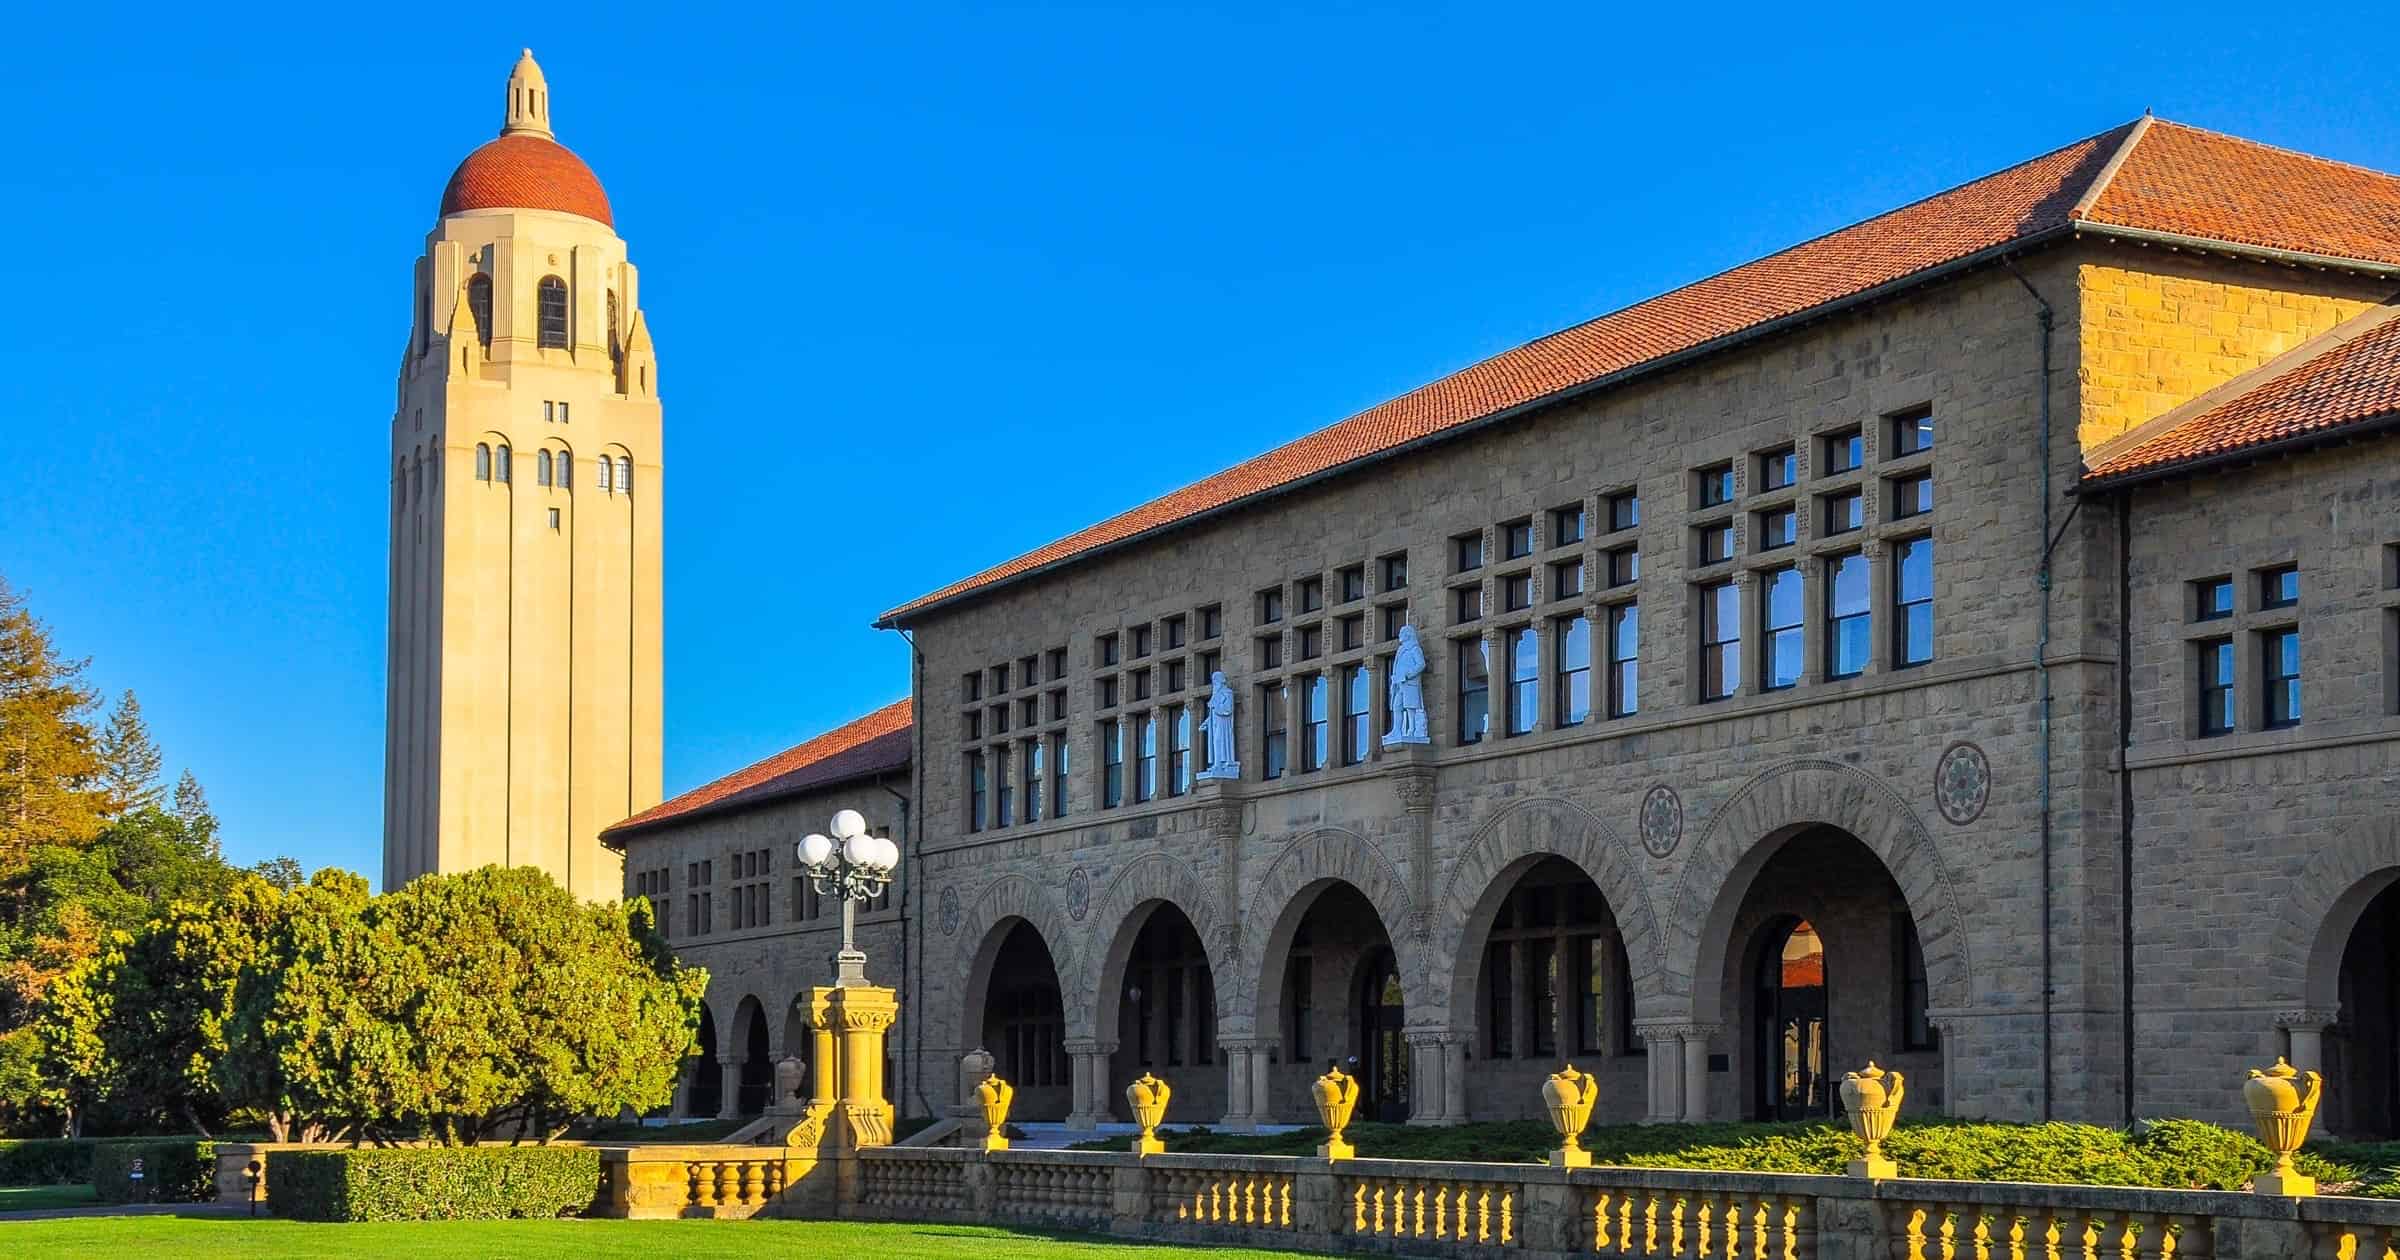 Brother-Sister Duo Charged With Stealing MacBooks From Stanford